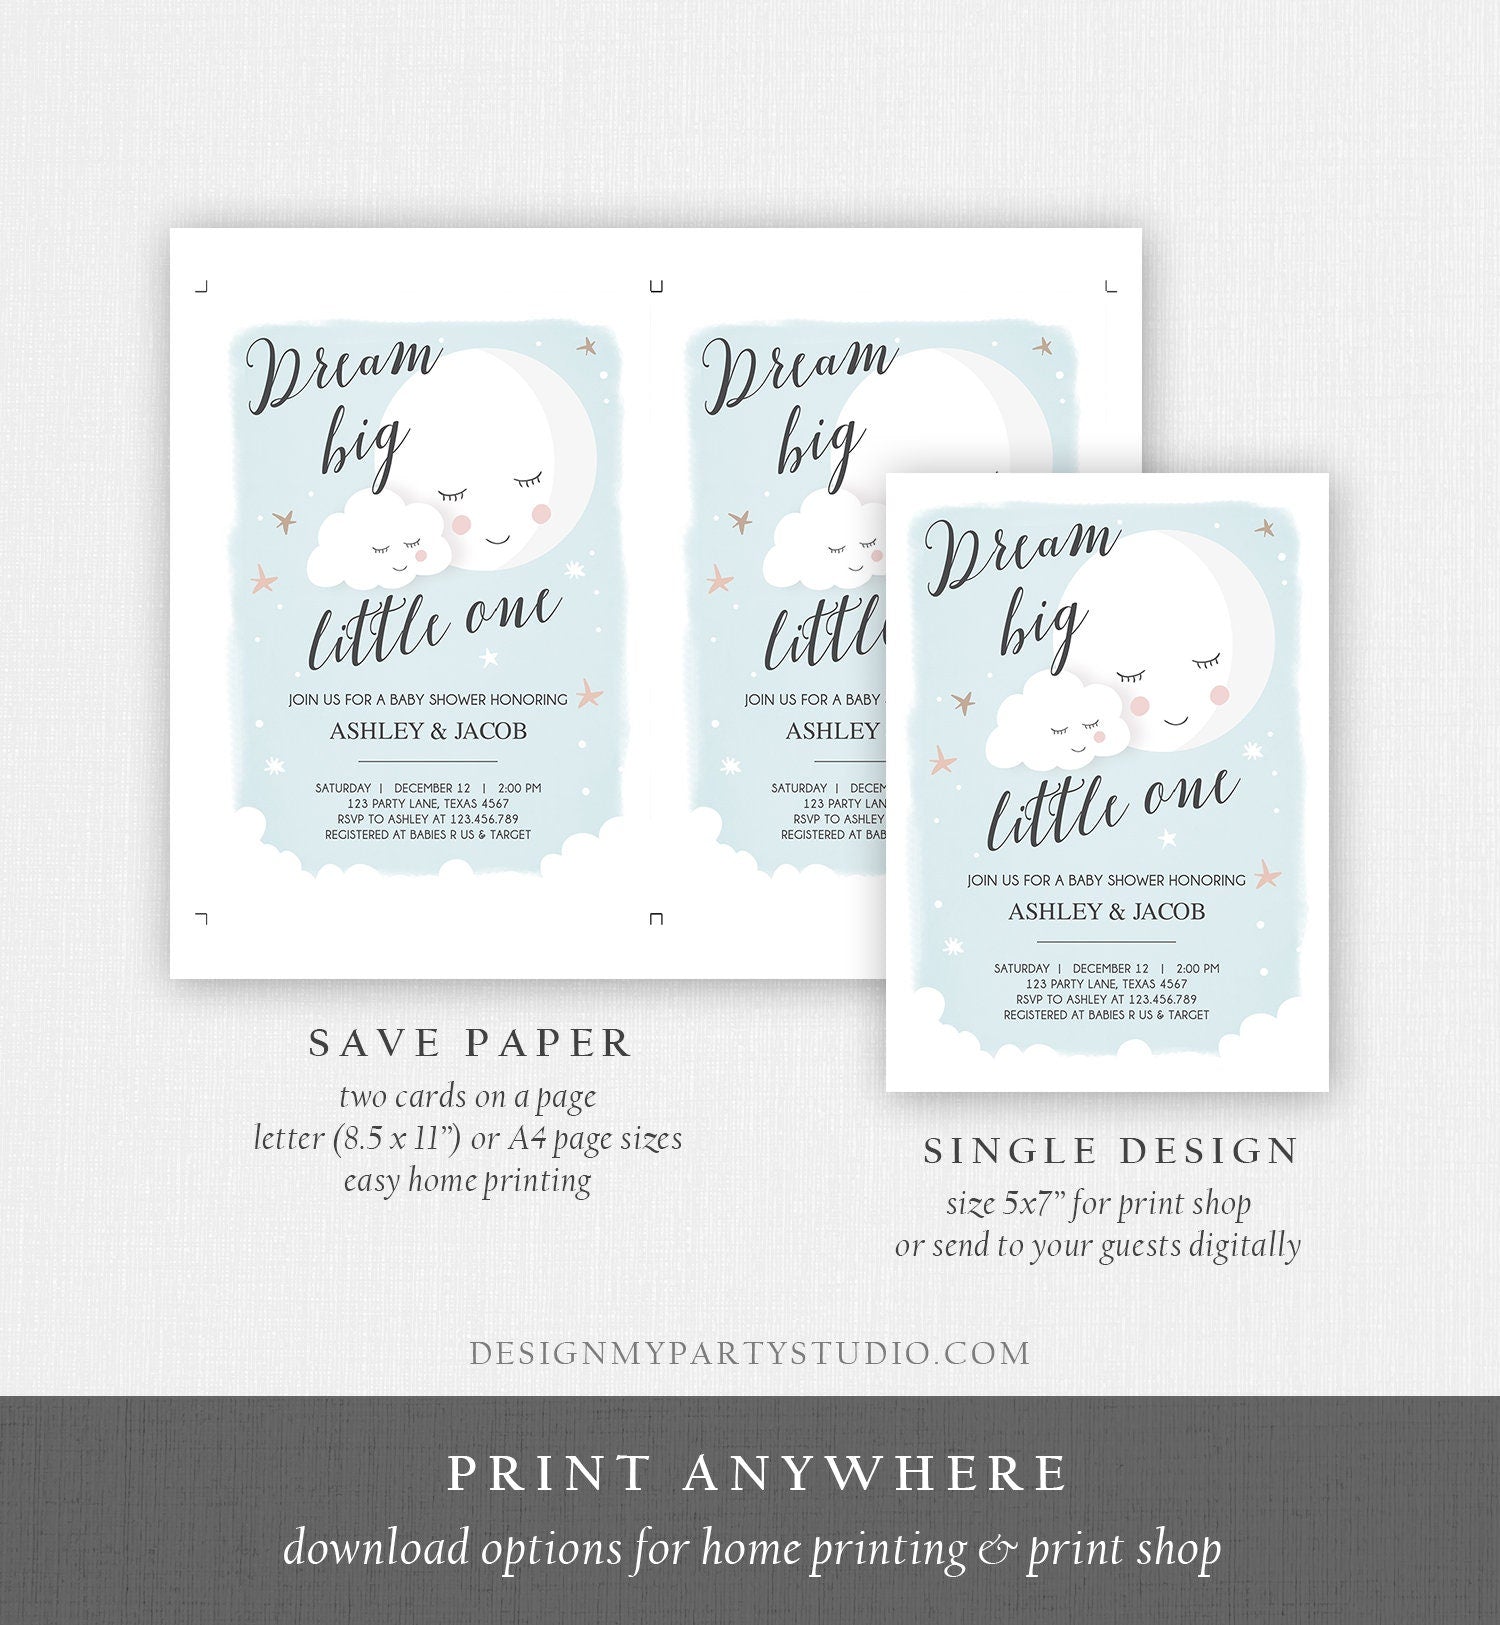 dream big little one baby shower invitations